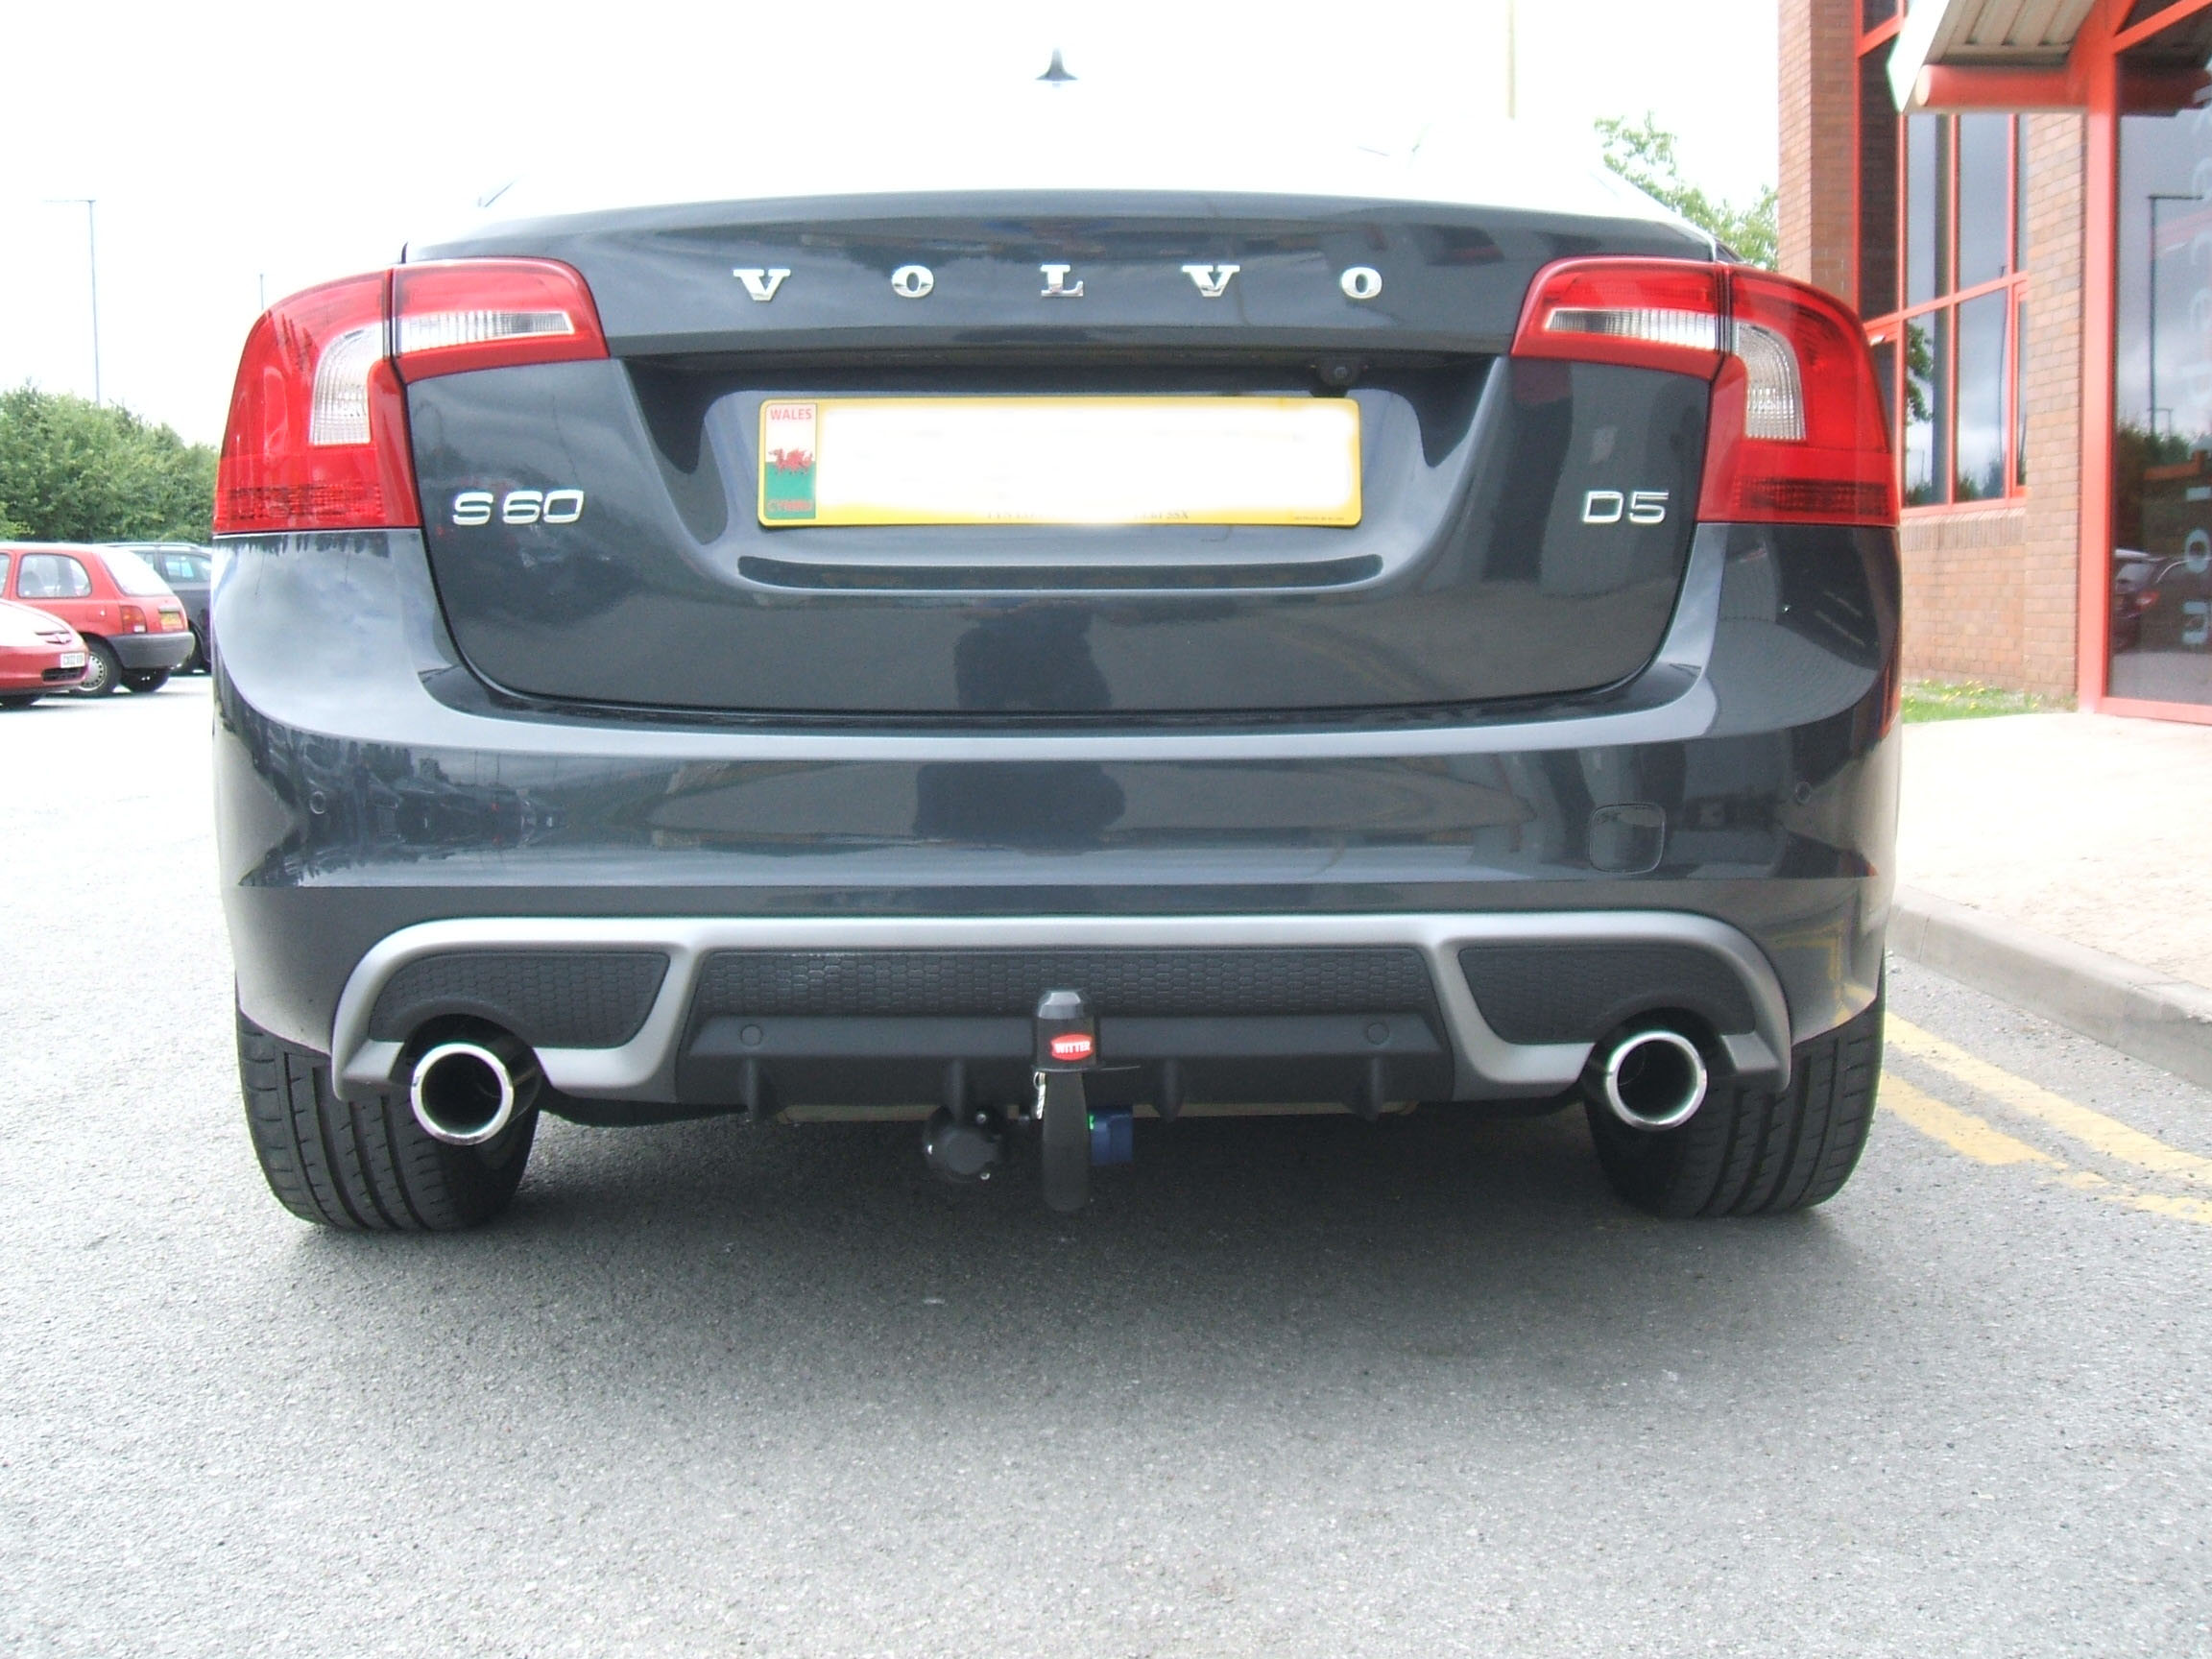 Towbars for Sale